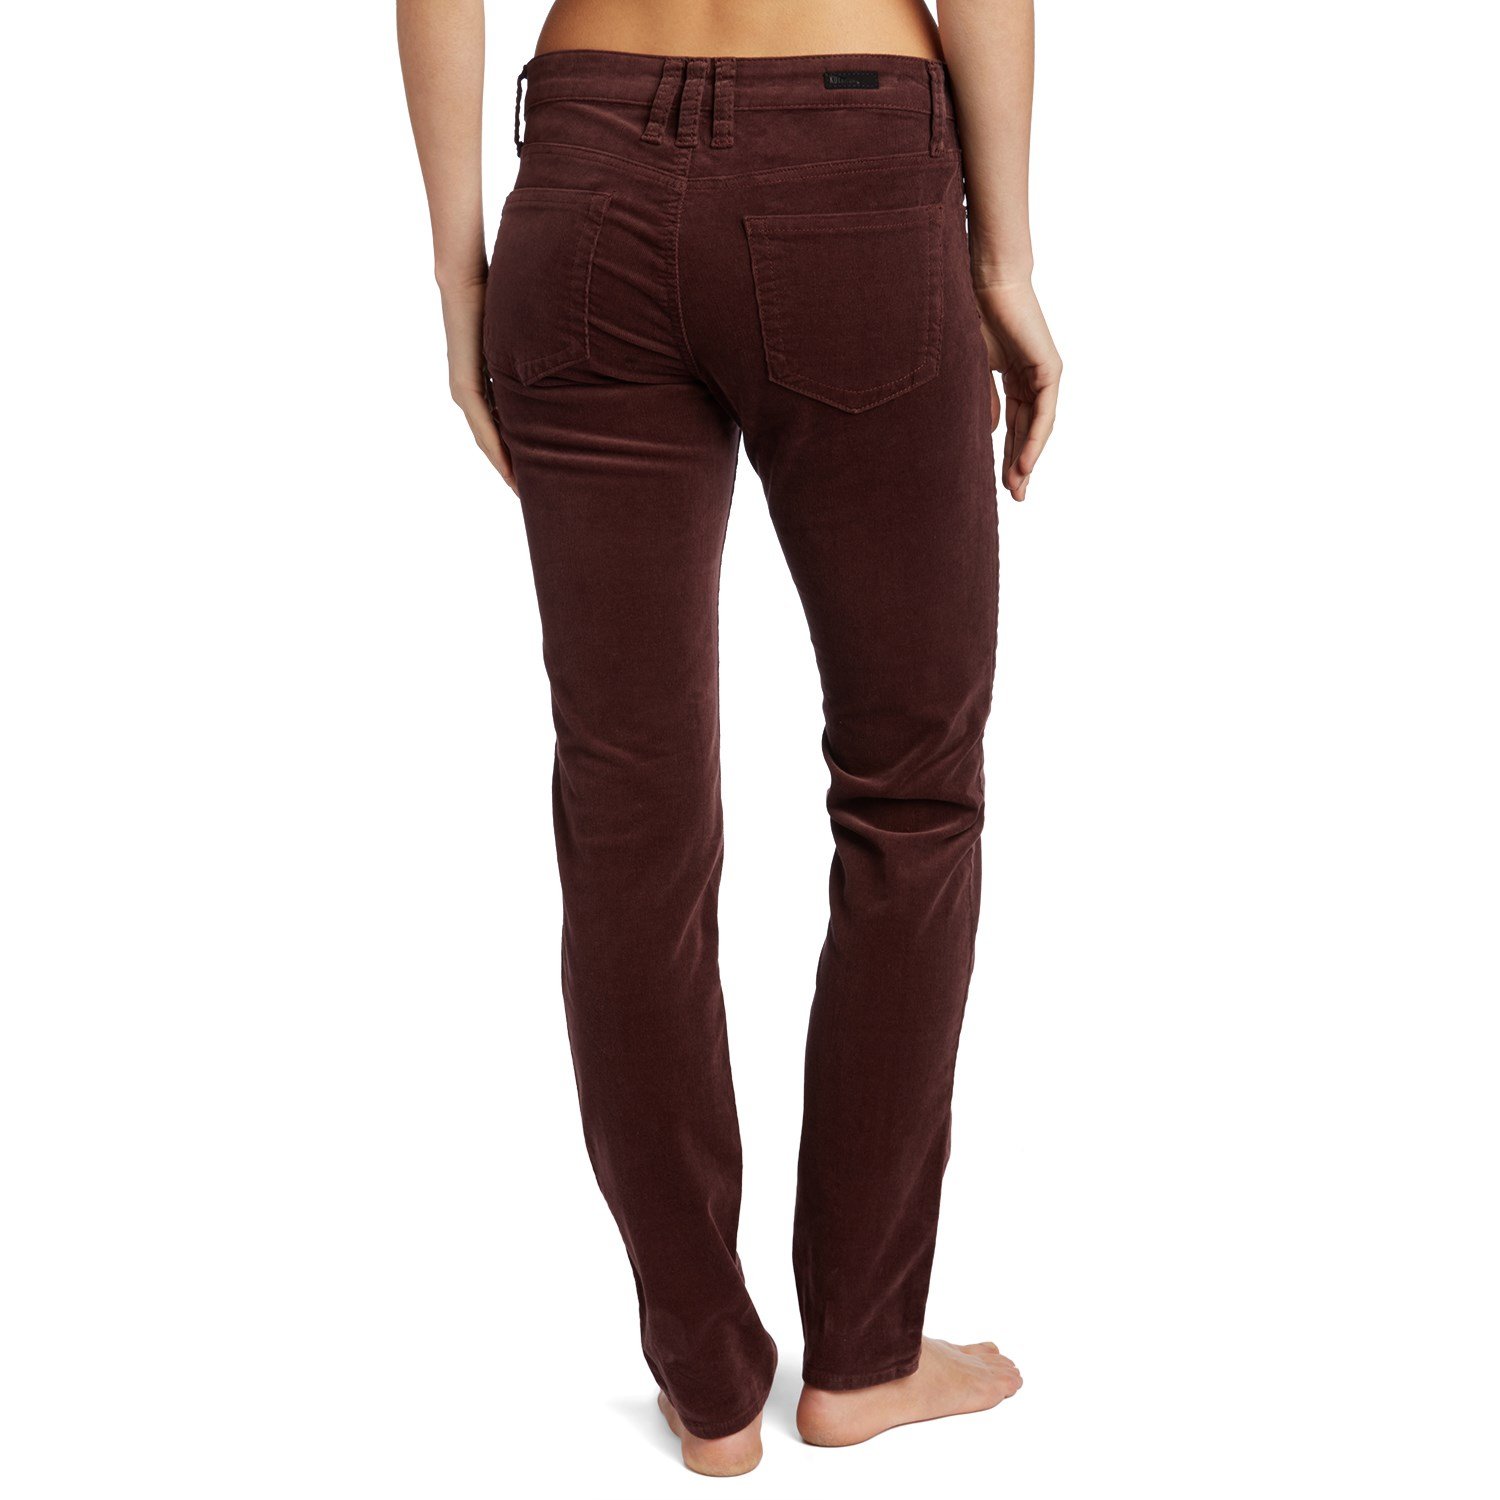 kut from the kloth corduroy pants